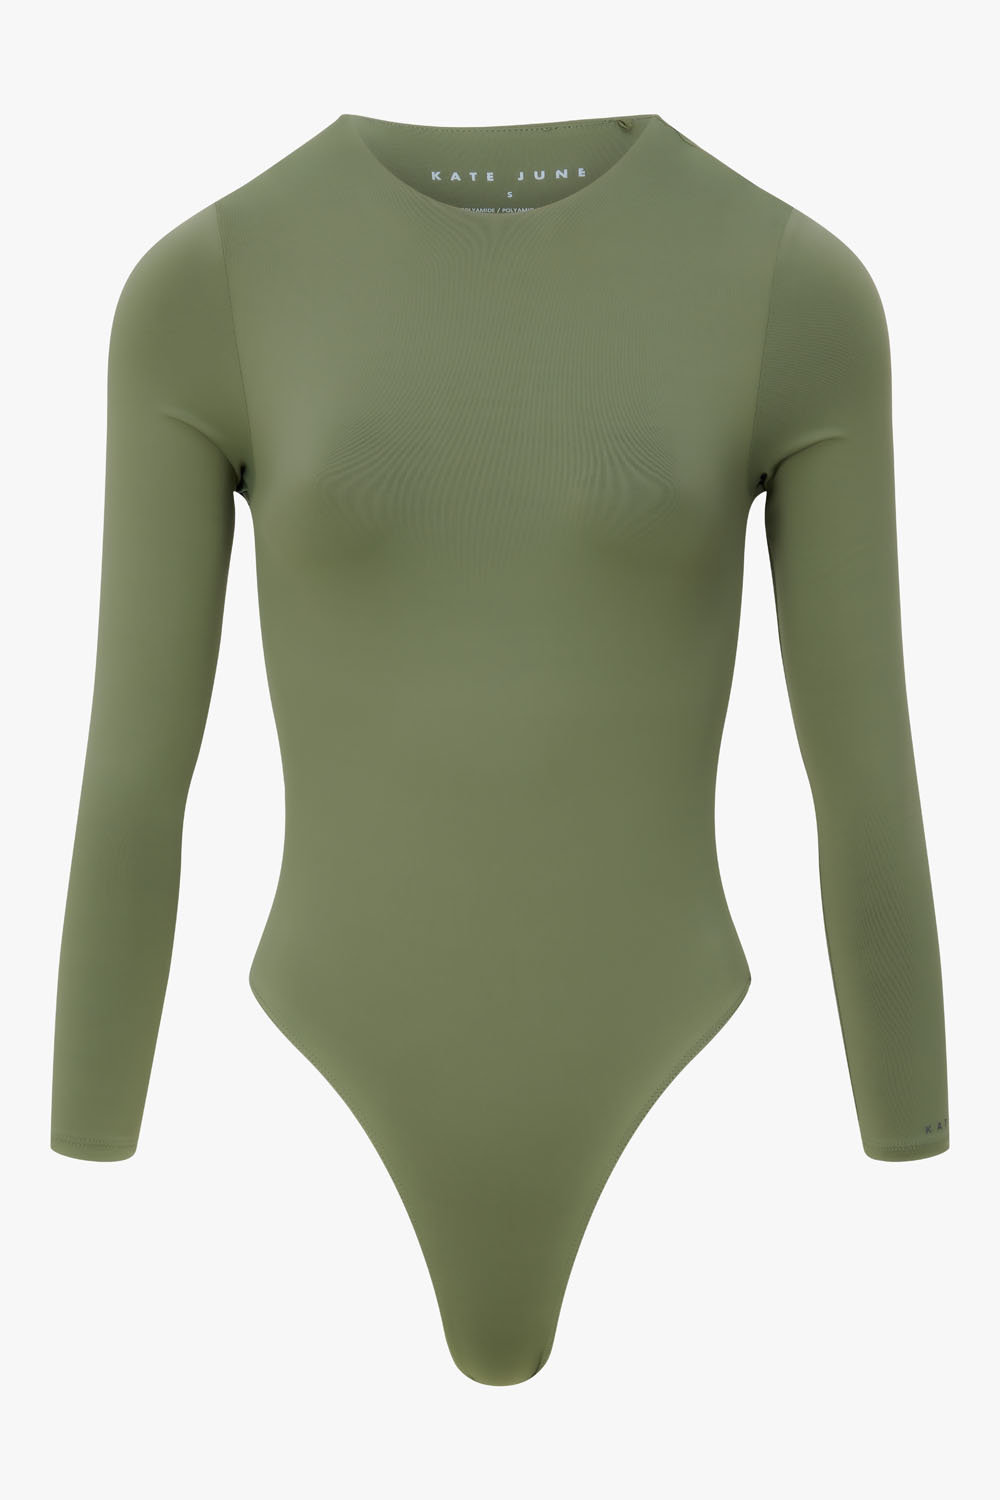 THE ROUND NECK BODY ARMY GREEN